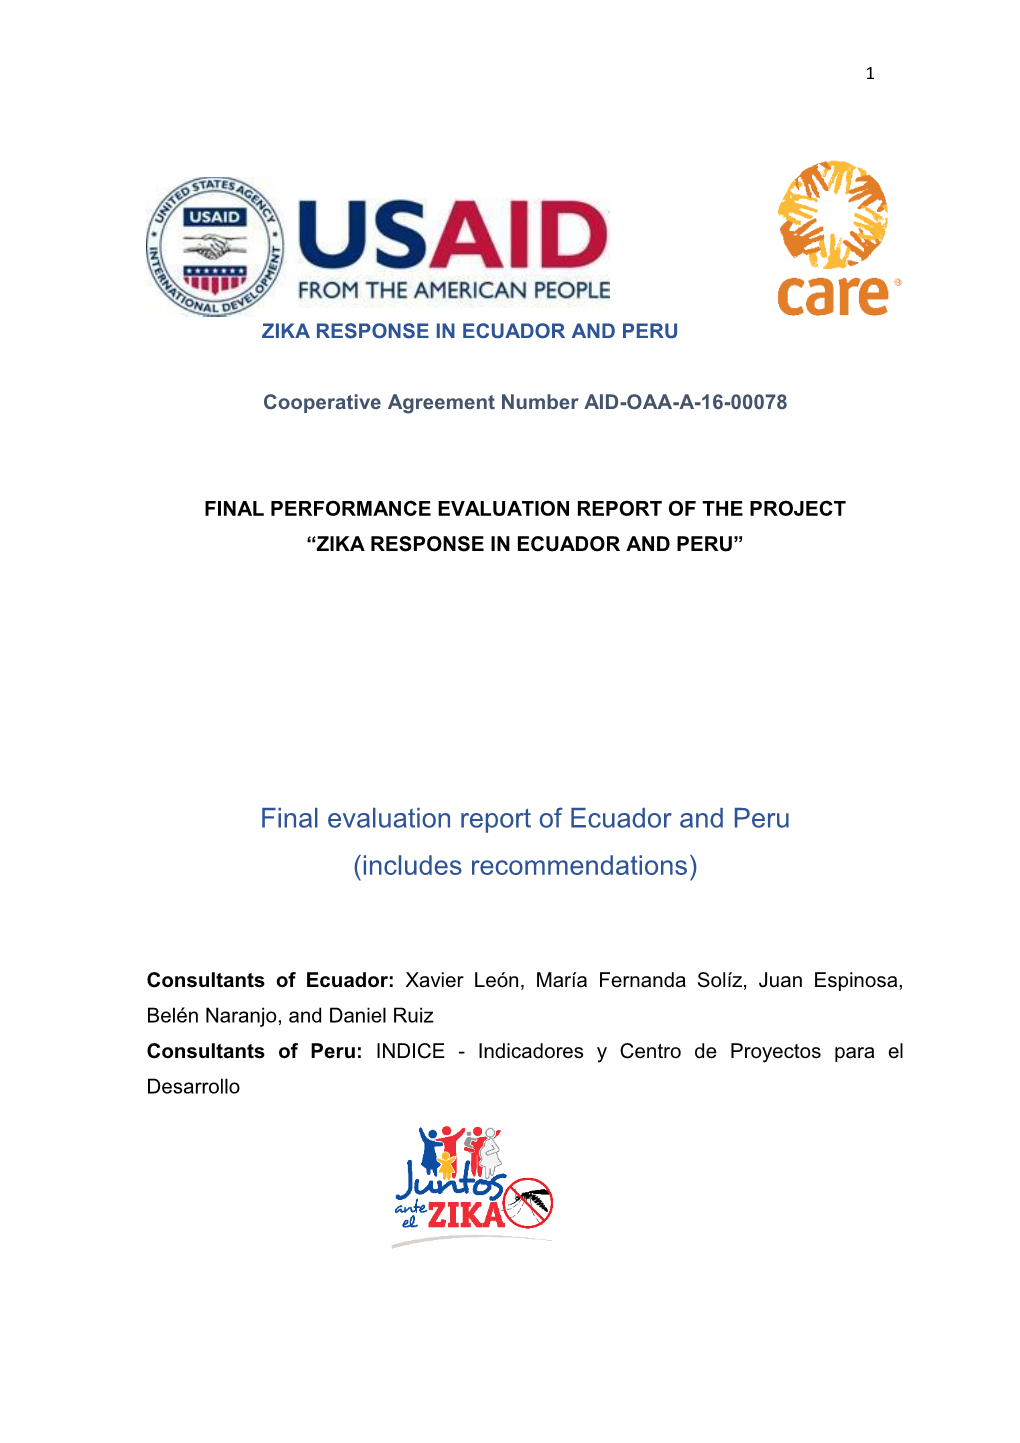 Final Evaluation Report of Ecuador and Peru (Includes Recommendations)